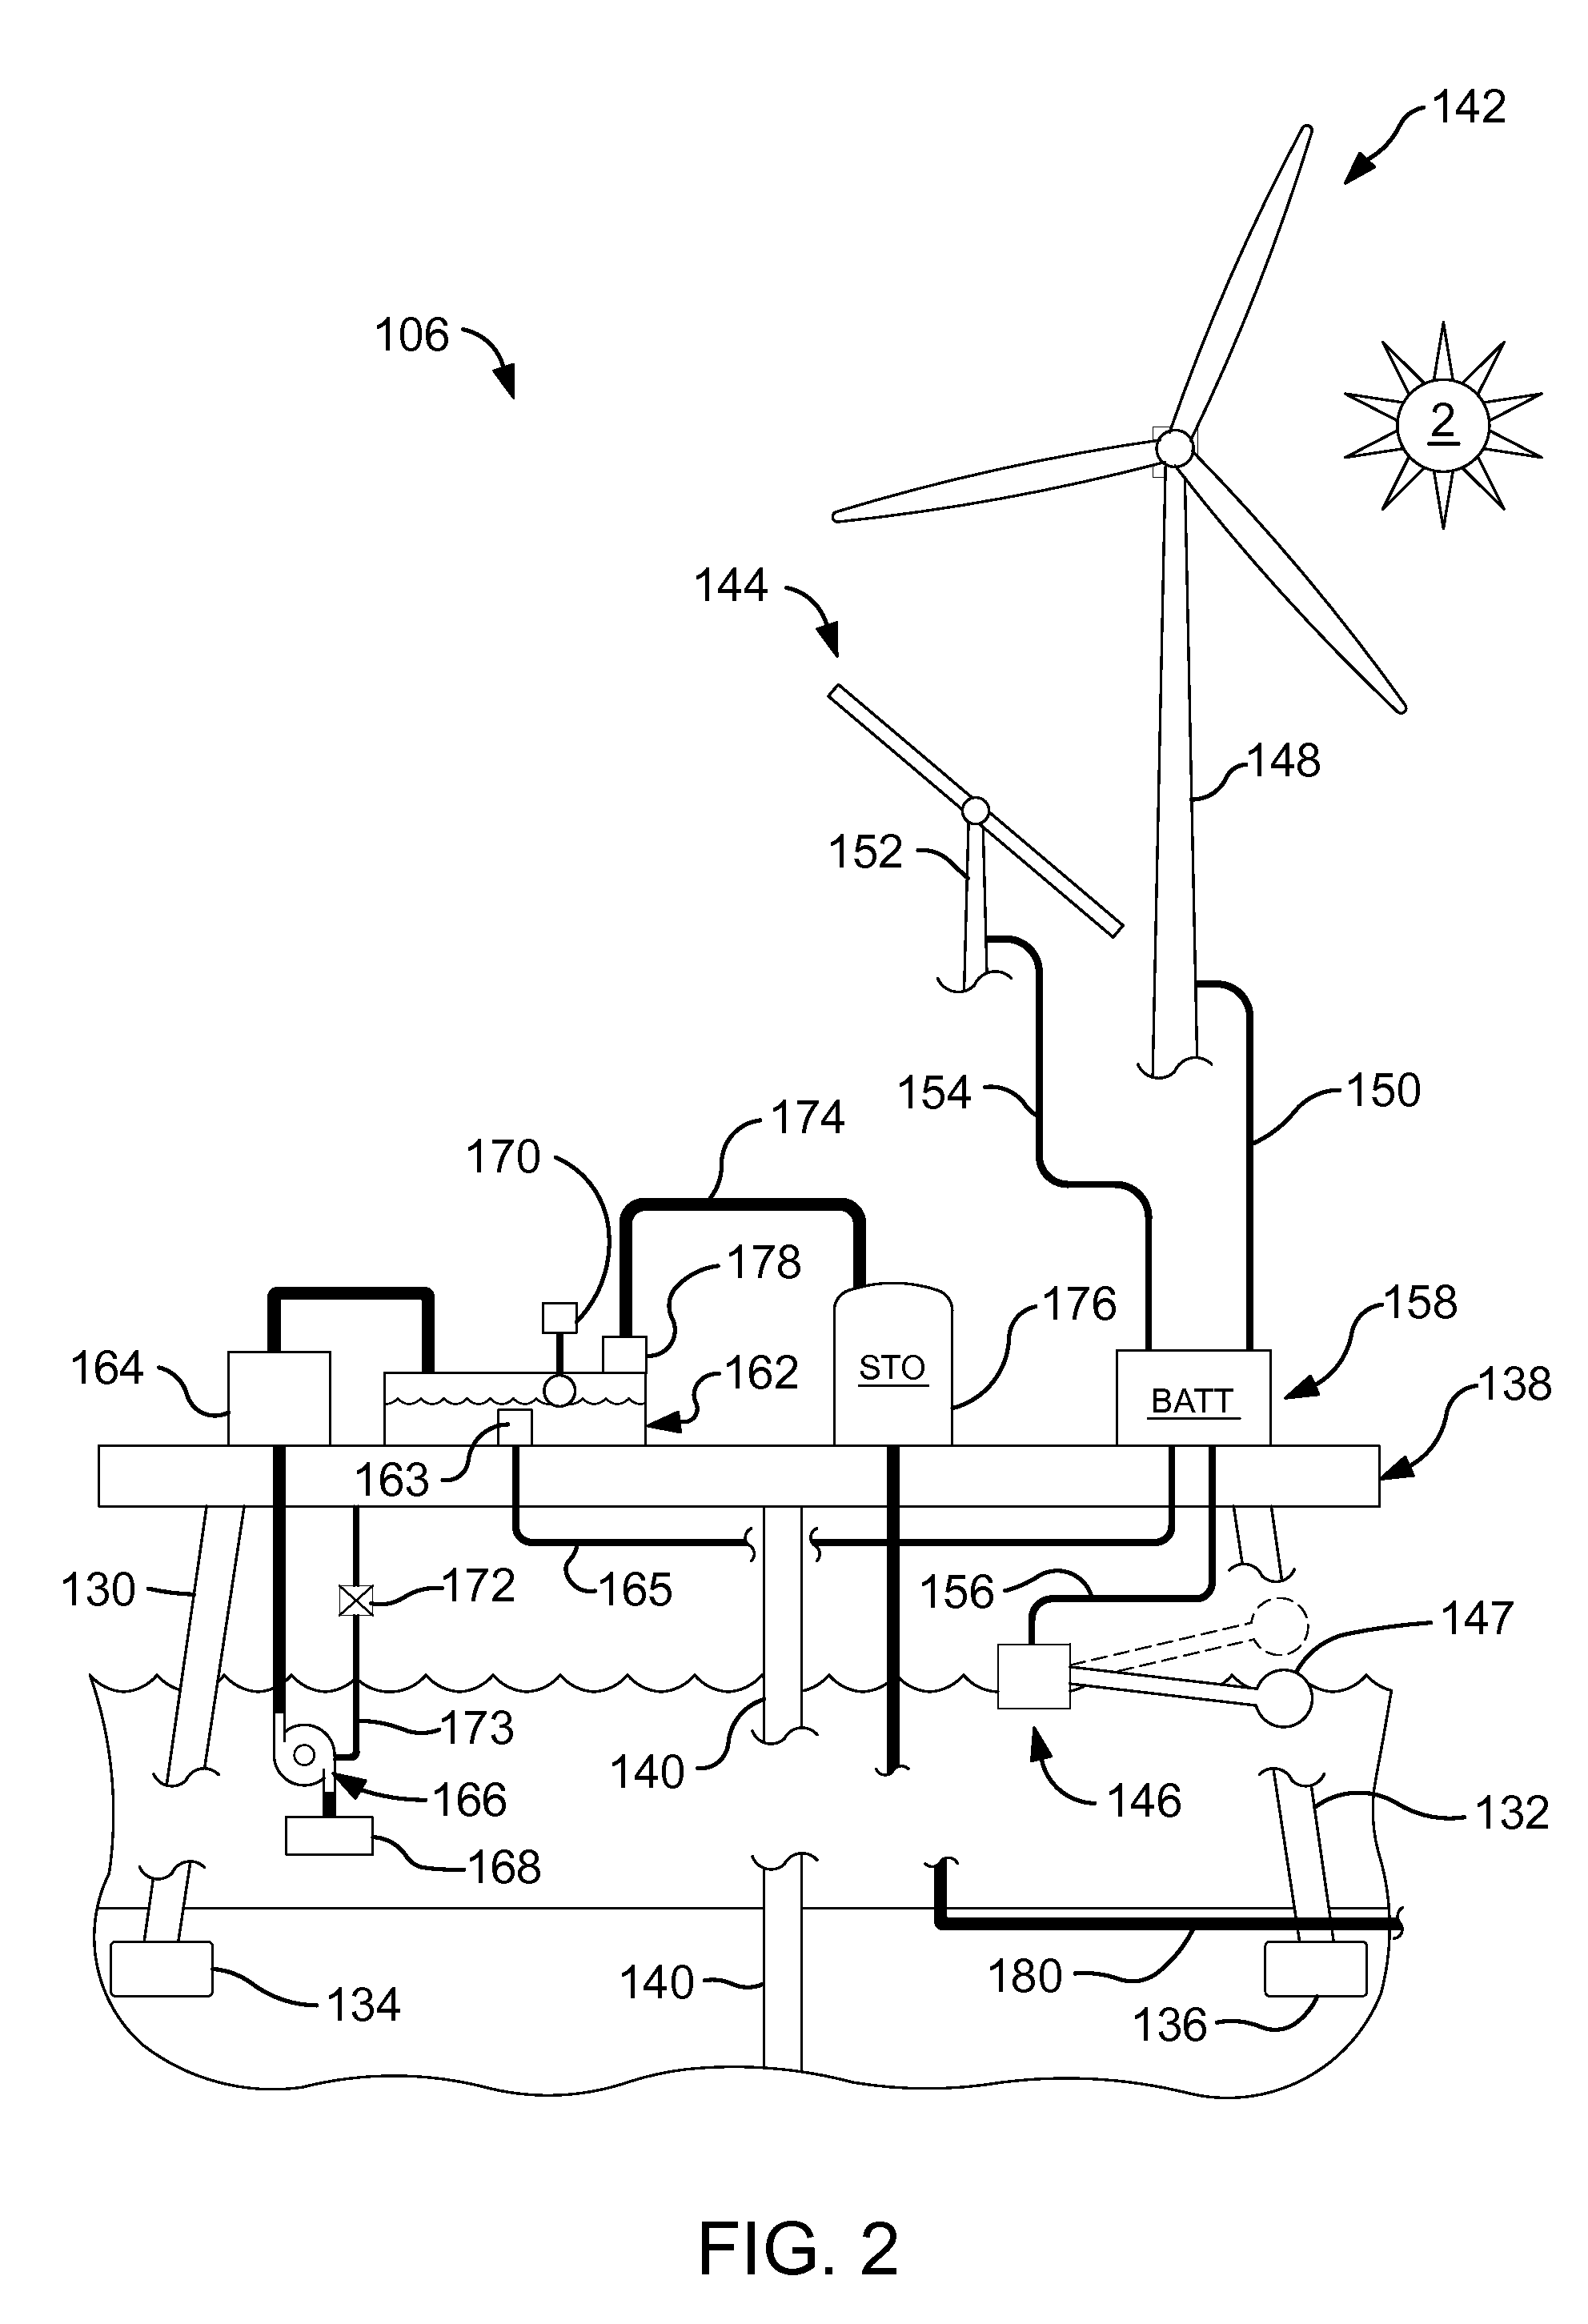 Hydrogen generation and distribution system